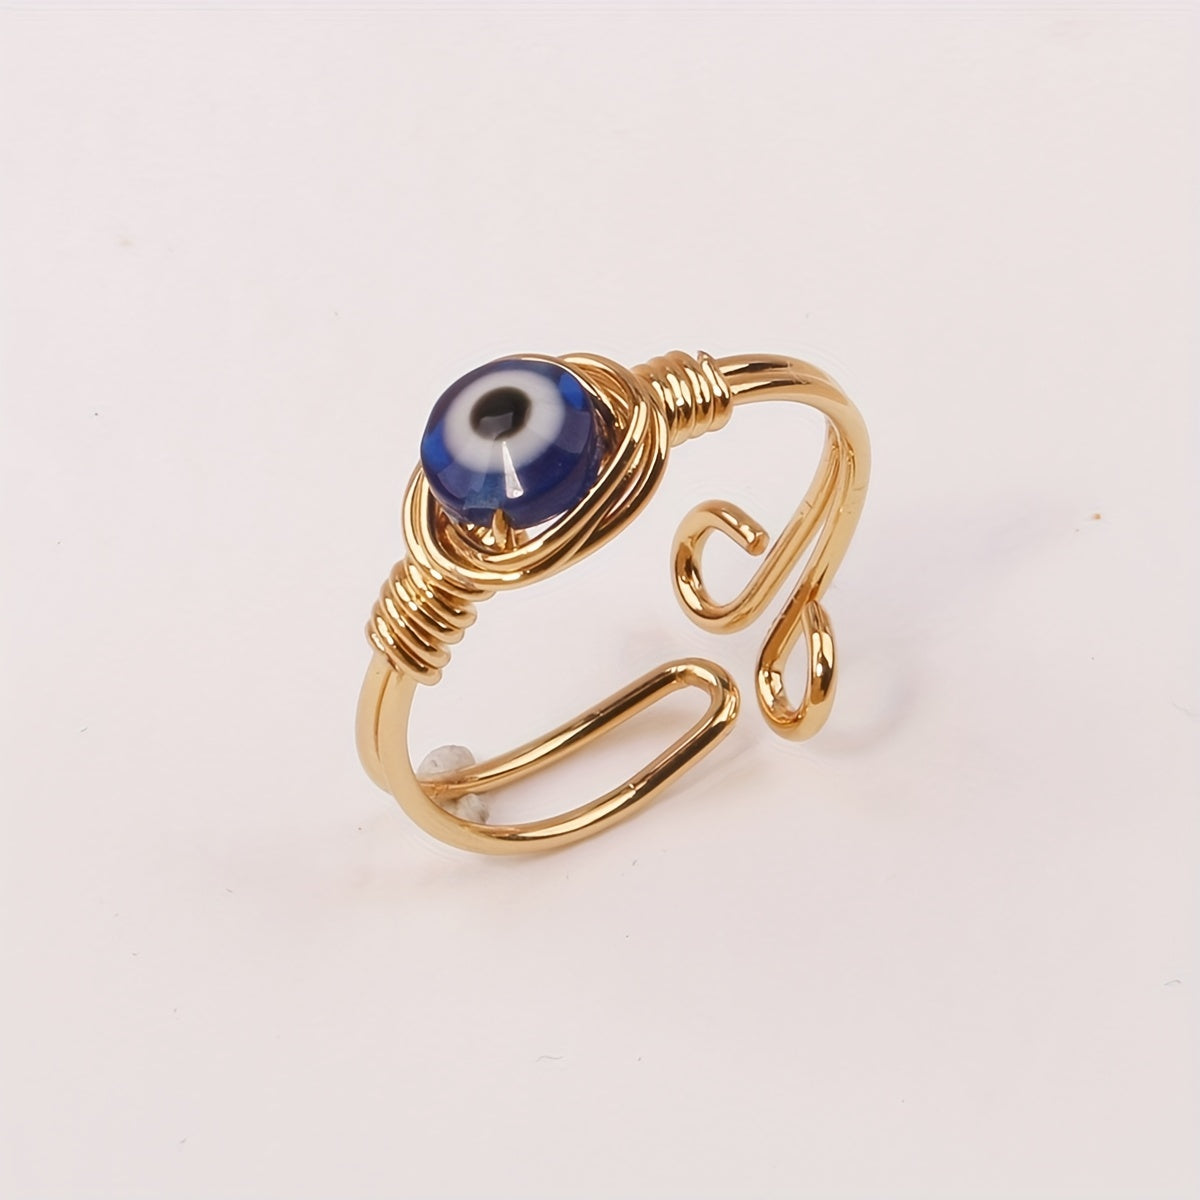 1pc Blue Evil Eyes Open Adjustable Rings Dainty Lucky Protection Jewelry Gifts